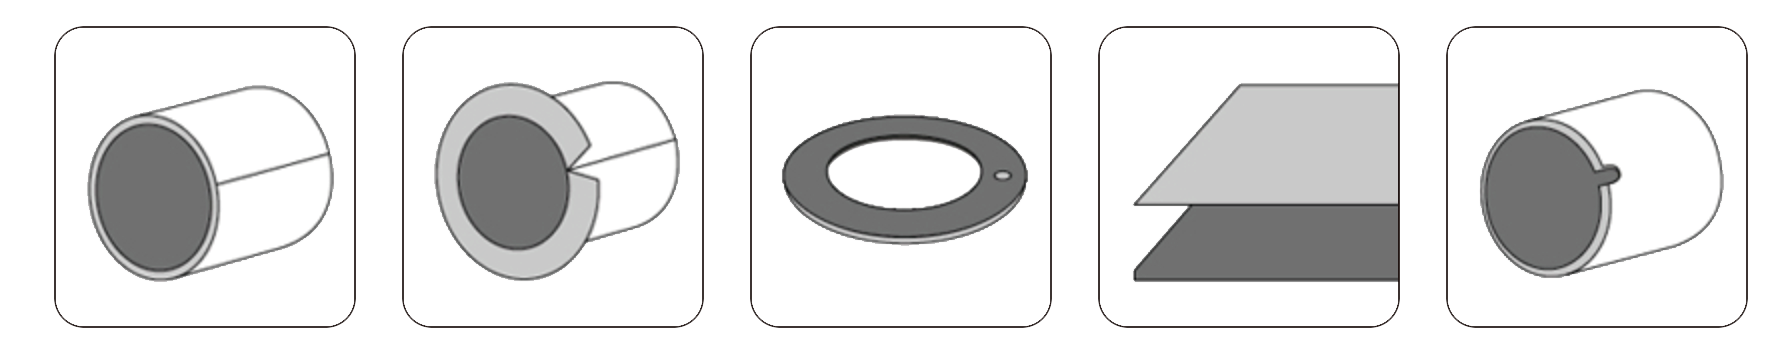 Structure of self - lubricating bearings